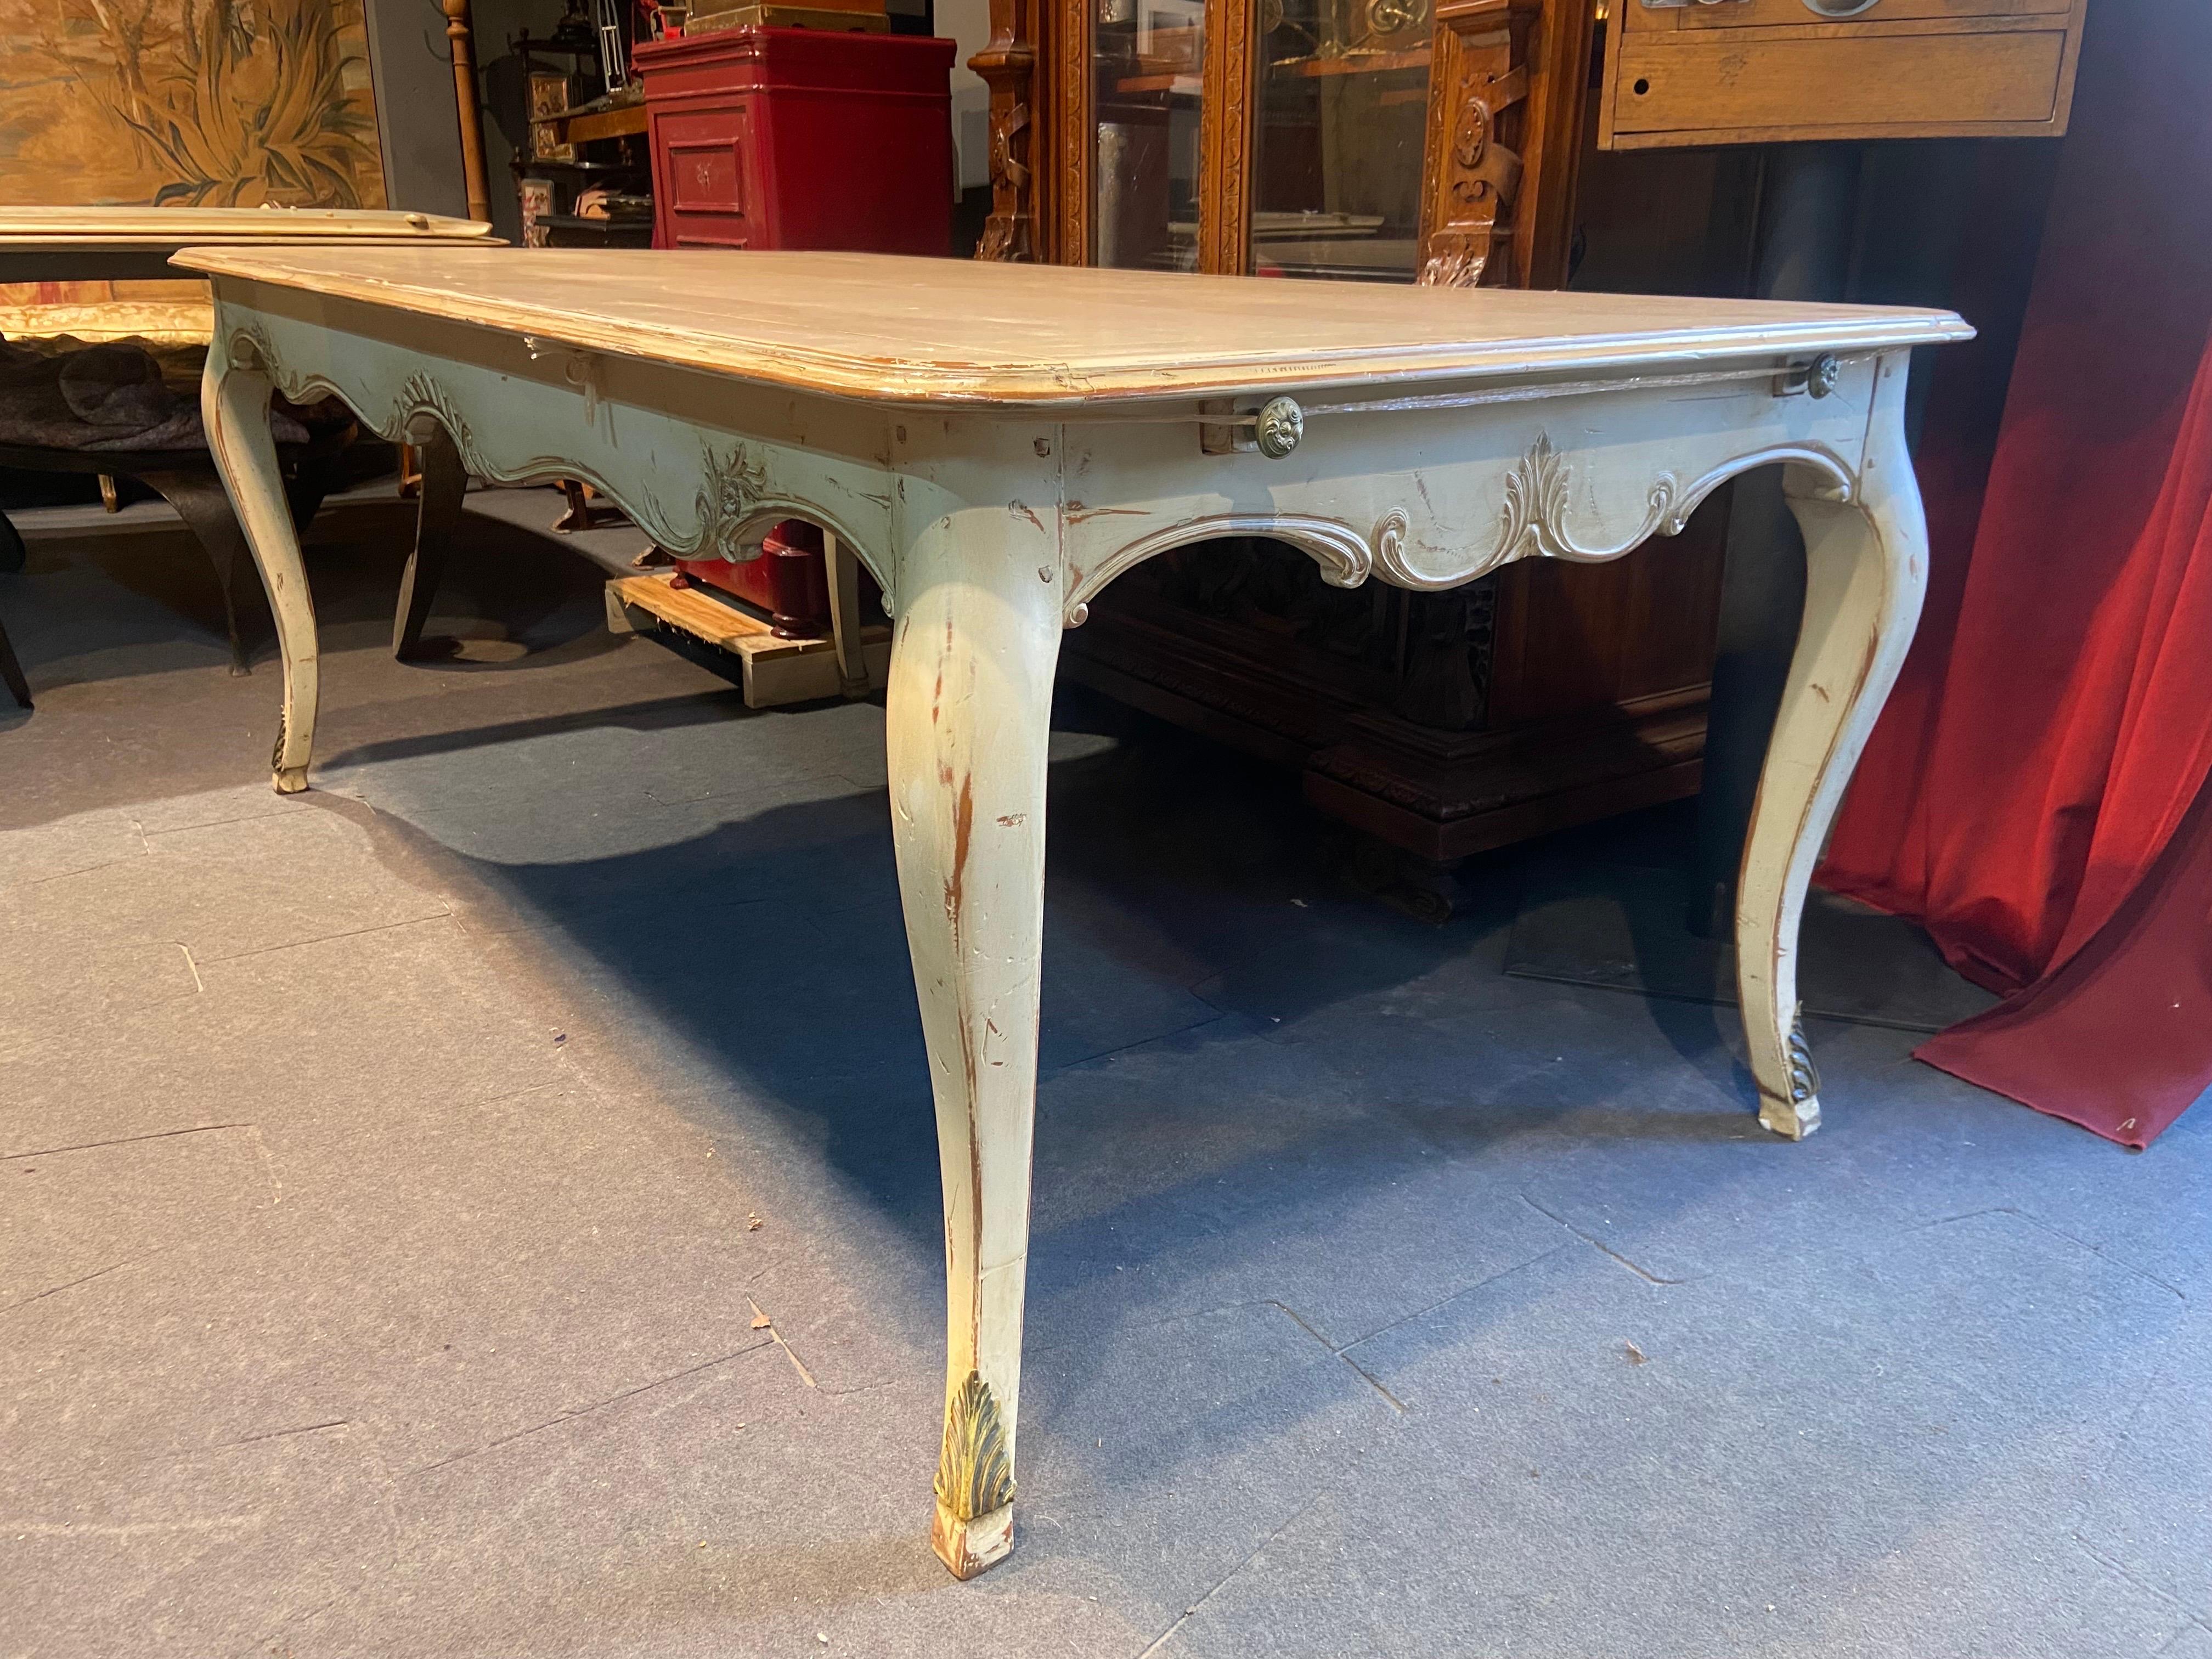 Large dining table made of cream lacquered hand carved wood.
The piece was made in 2019 by Maison Moissonnier - a famous French furniture makers since 1885. it has a bowed legs, sculpted crosspieces, top with 